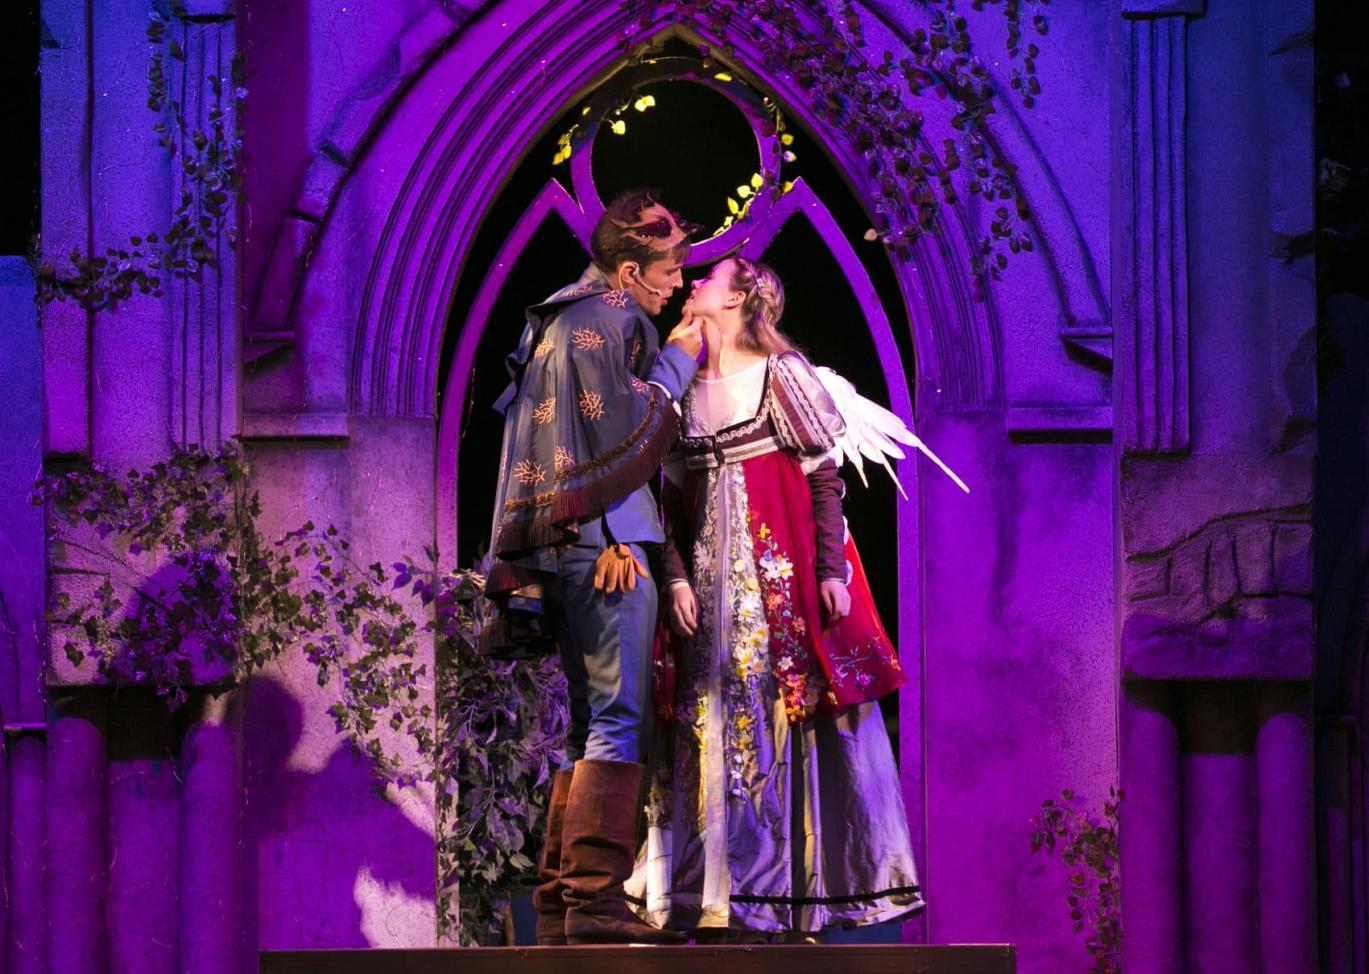 How Does Shakespeare's Romeo and Juliet Explore the Theme of Love?